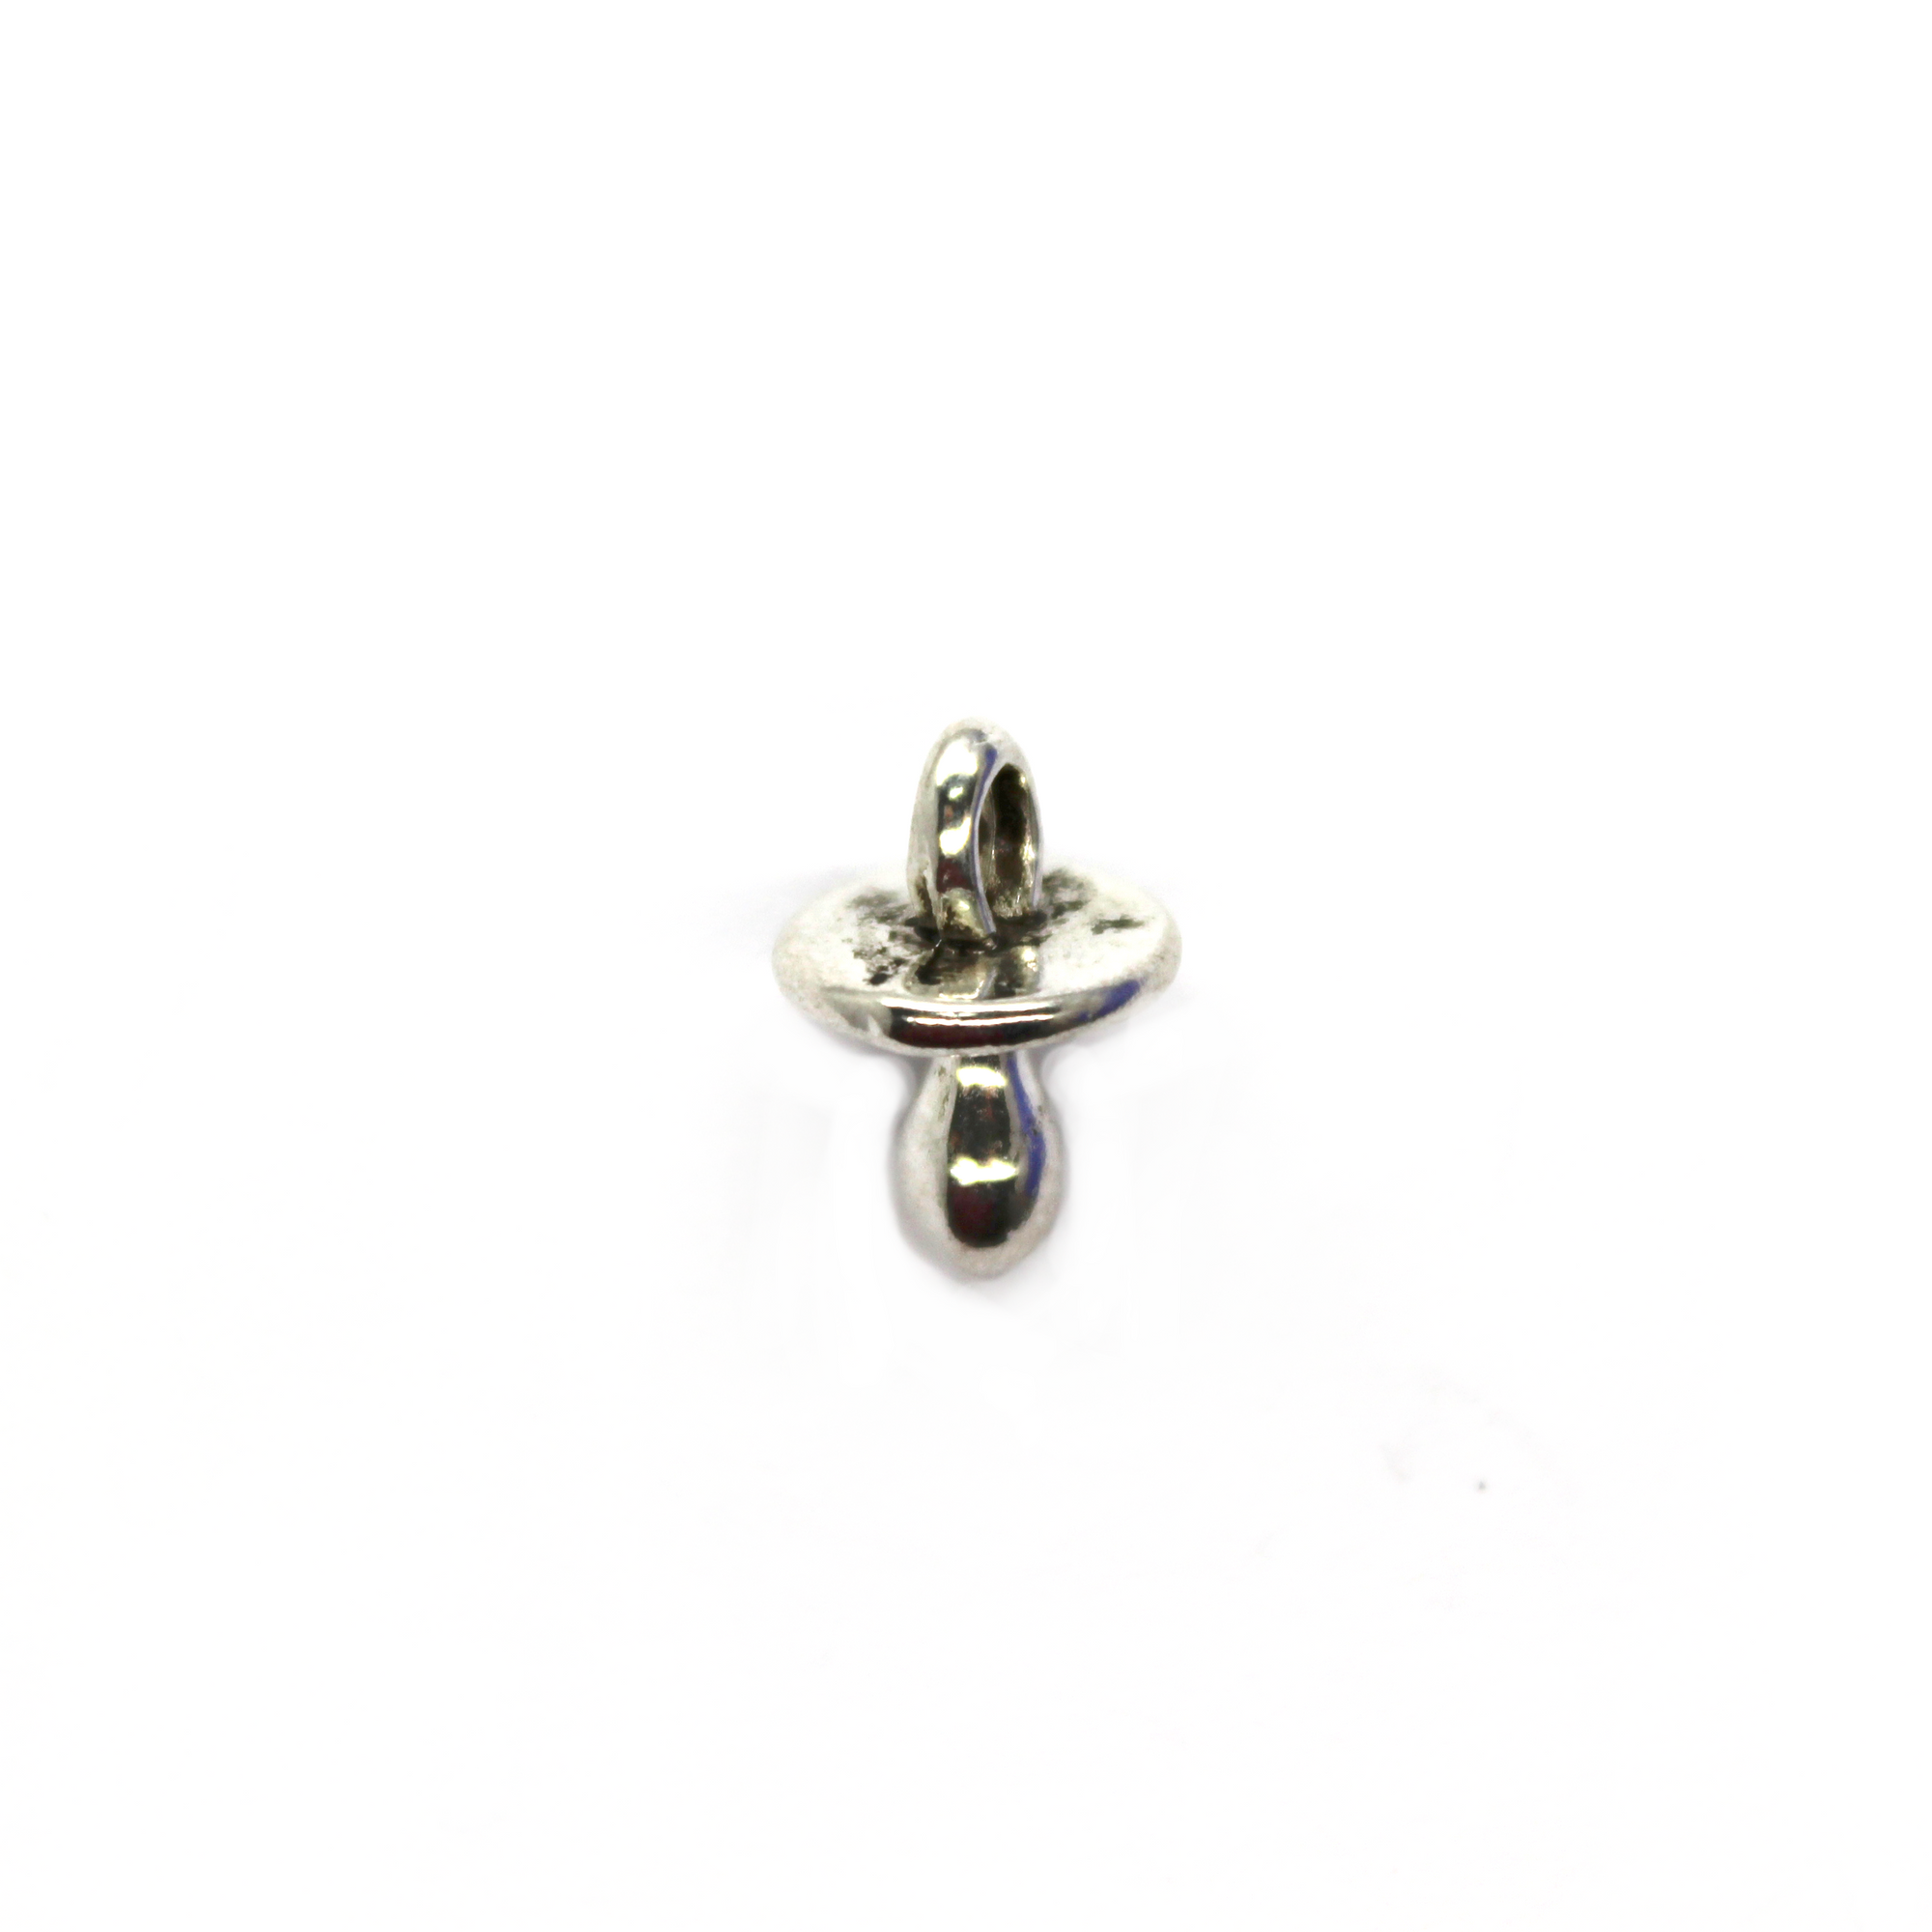 Charms, Baby Pacifier, Silver, Alloy, 13mm X 10mm, Sold Per pkg of 14